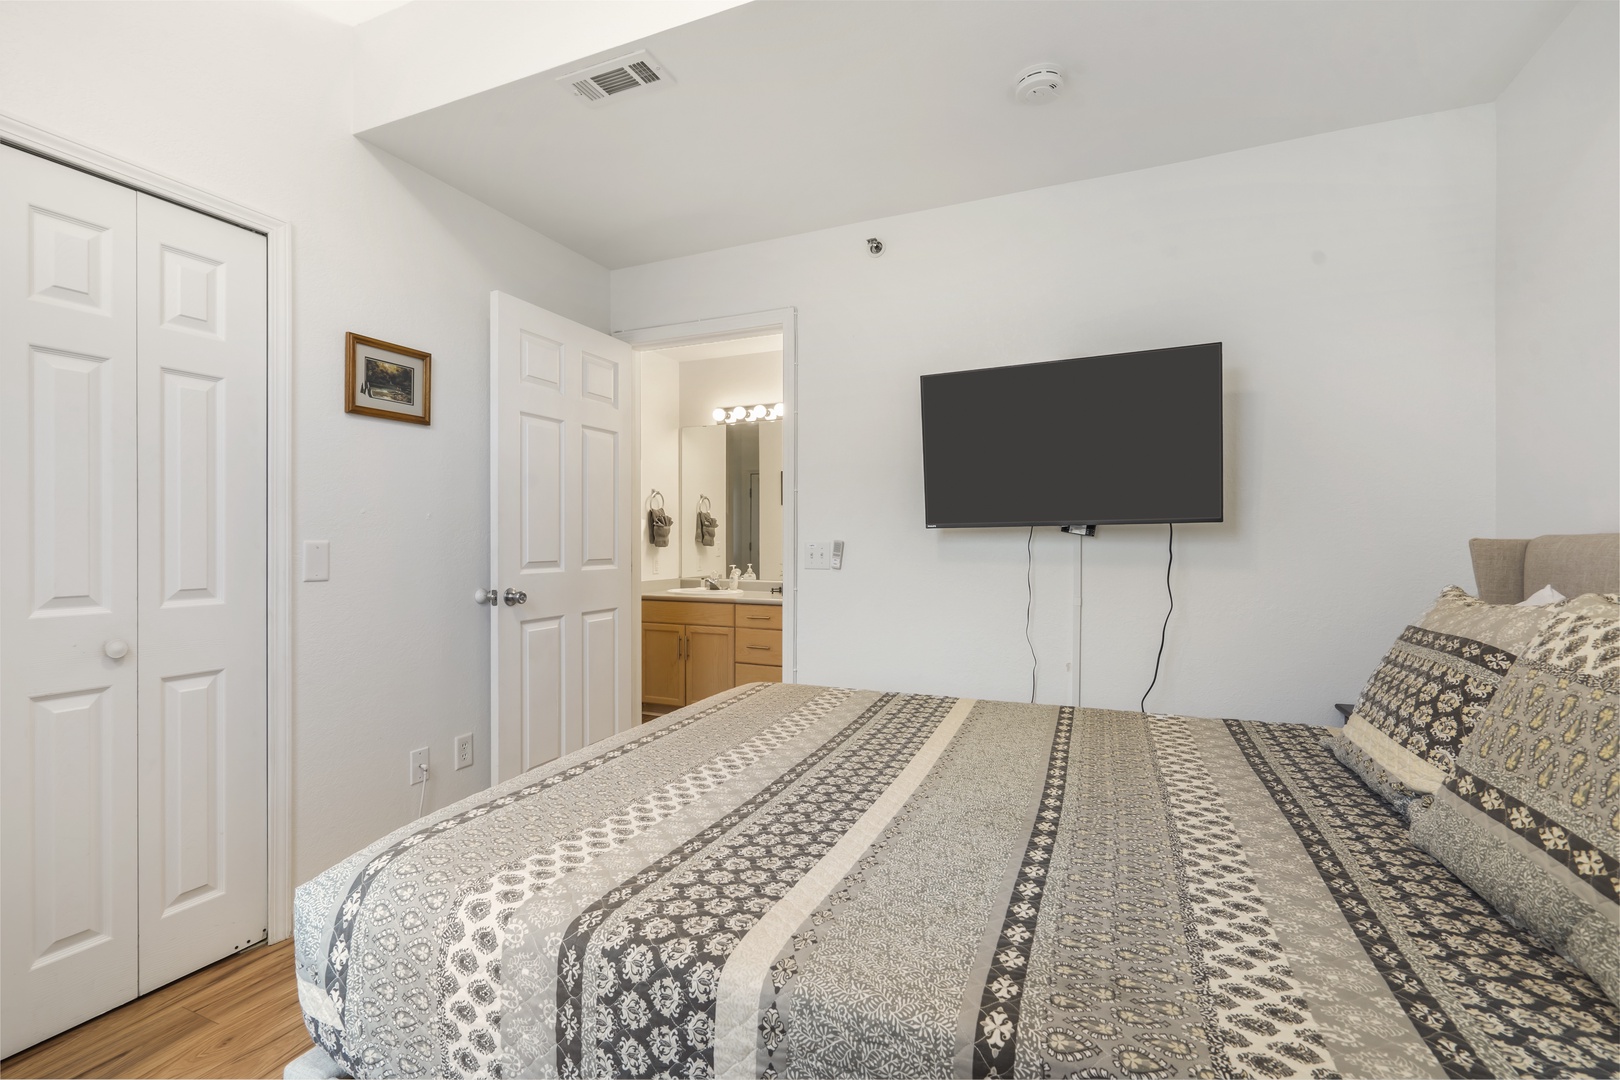 This main-level bedroom sanctuary includes a queen bed, TV, & ensuite